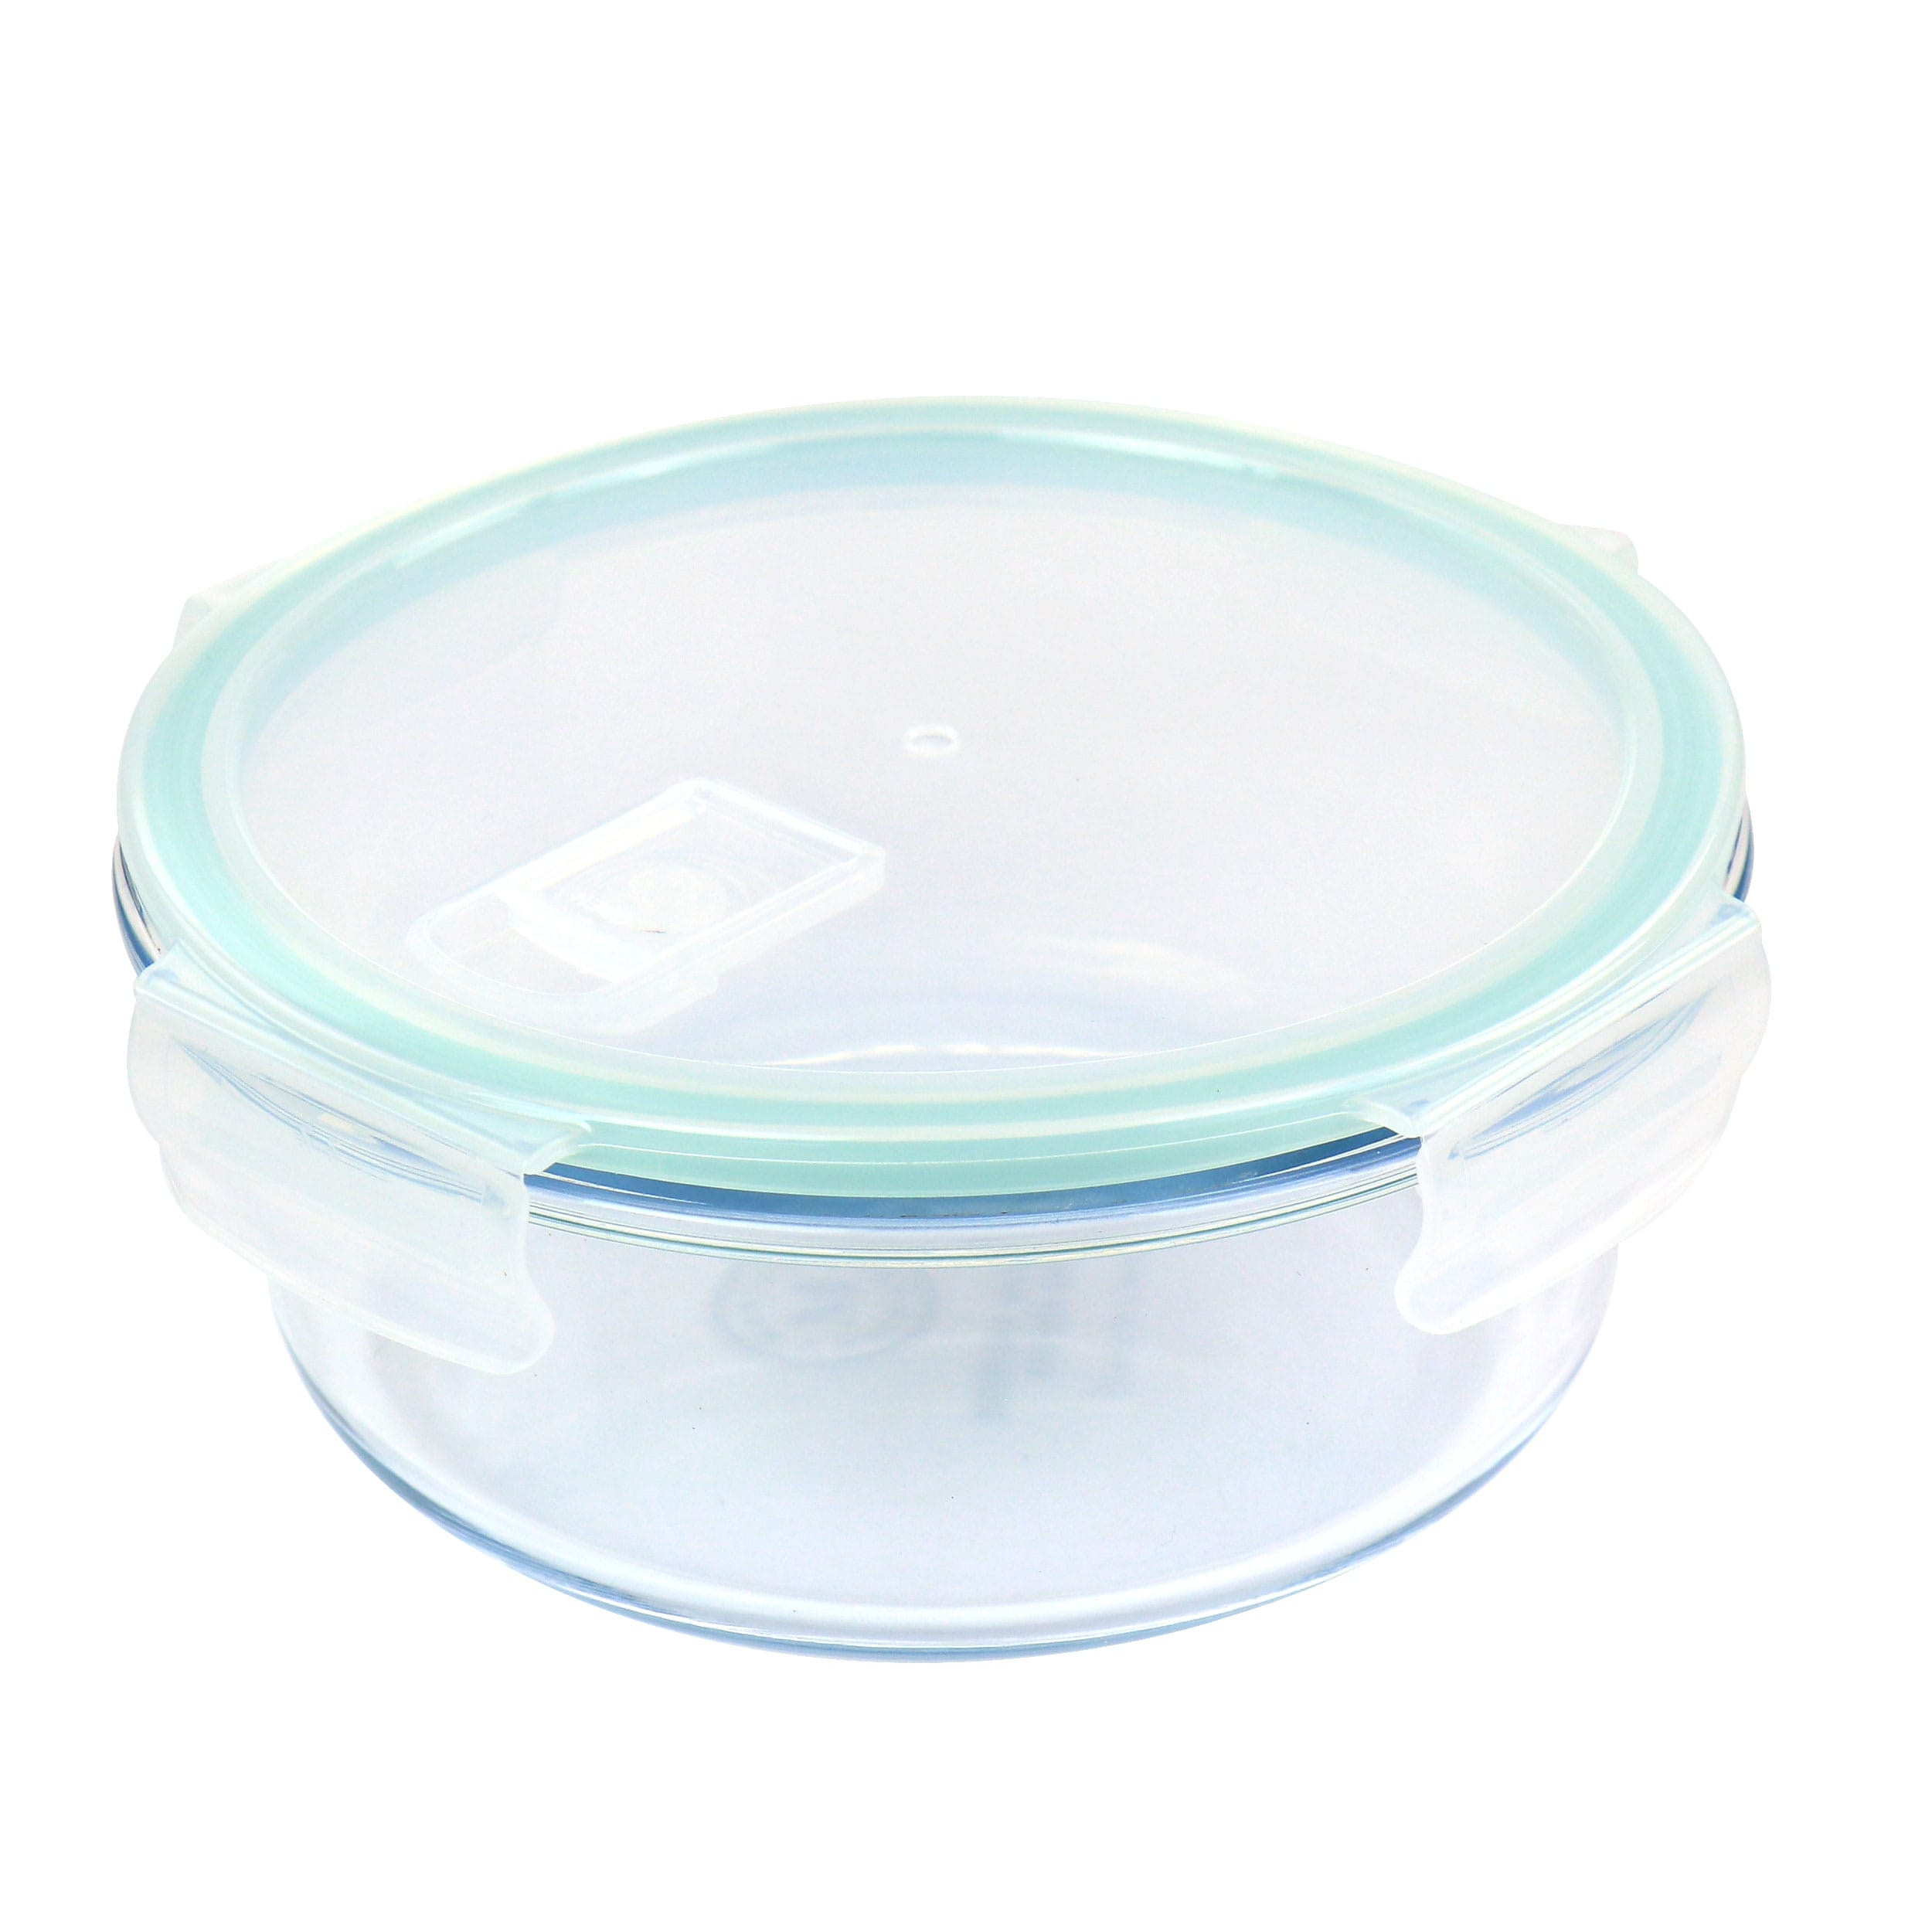 https://ak1.ostkcdn.com/images/products/is/images/direct/98c7adcbd974db2ca5ae1e3e1ed460dc4d14665f/Martha-Stewart-32-Ounce-Glass-Container-with-Lid.jpg